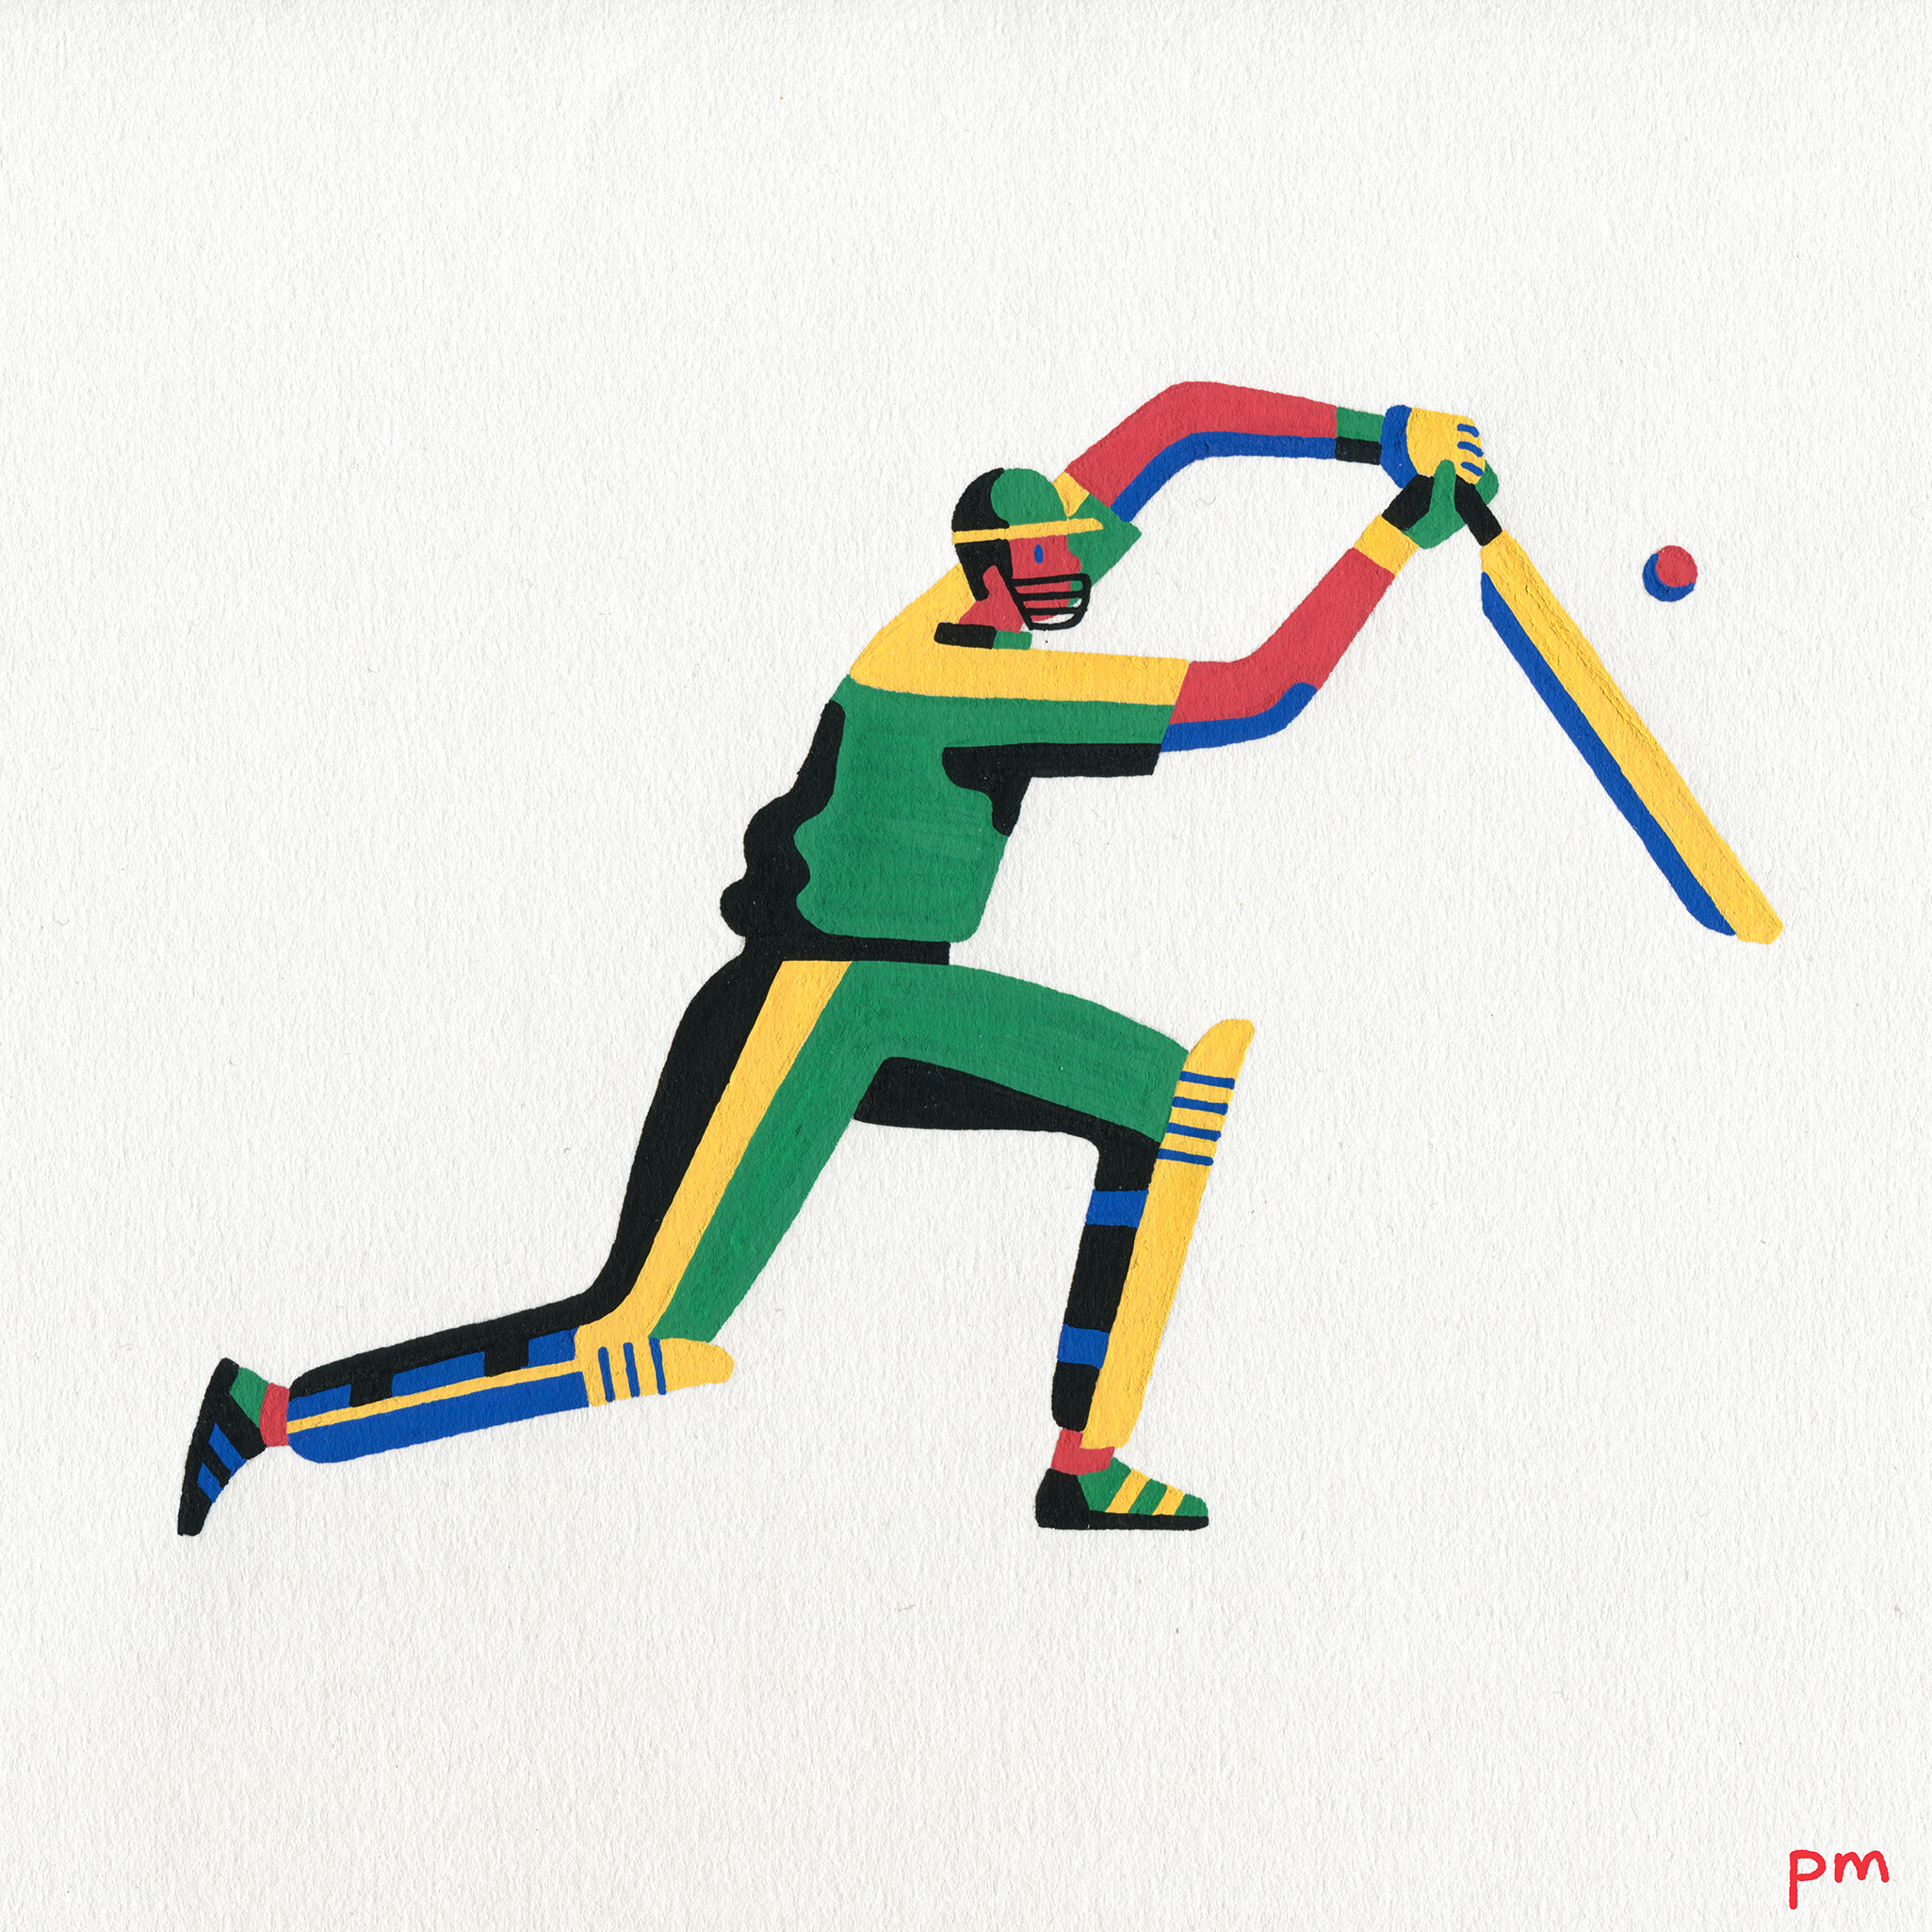 Here is a painted illustration of a batsman playing cricket, I hand drew these using posca markers